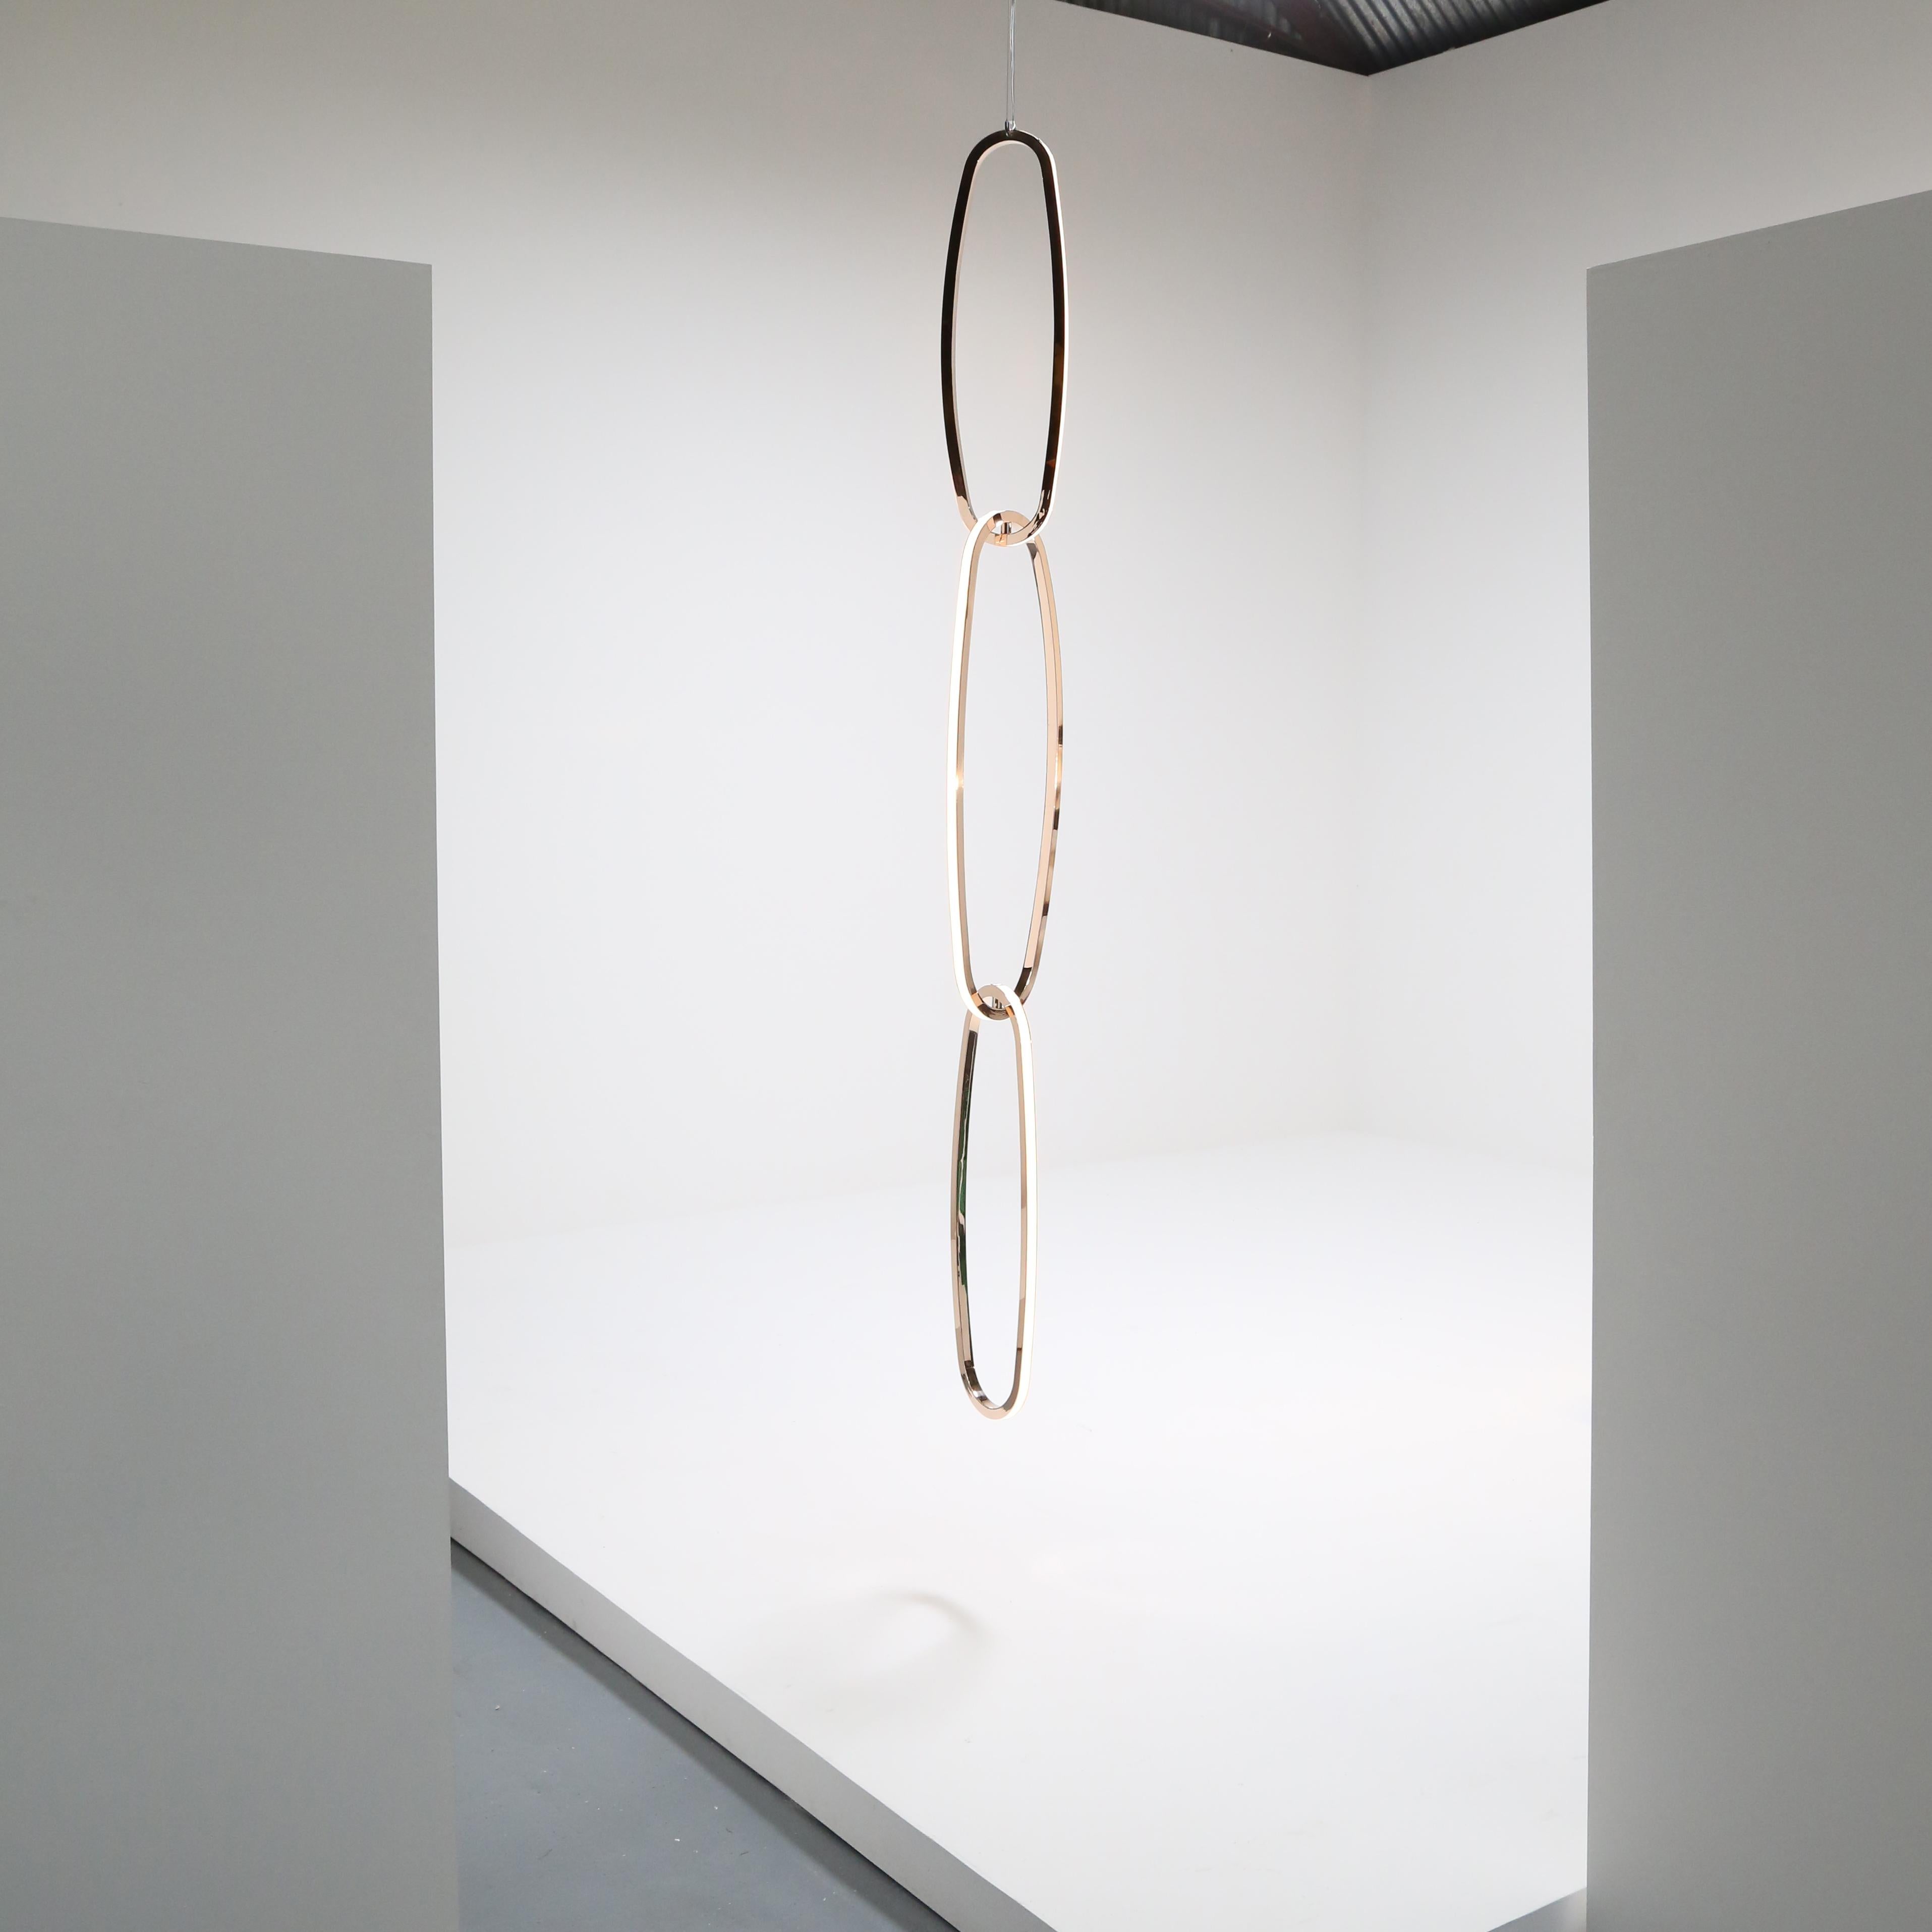 Link, true to its name, is made up of three rings of patinated and polished bronze, LEDs, and opal glass tiles. This piece stands out amidst Barry's other sculptures, unique for its simplicity of arrangement, and relative symmetry. 

Medium: